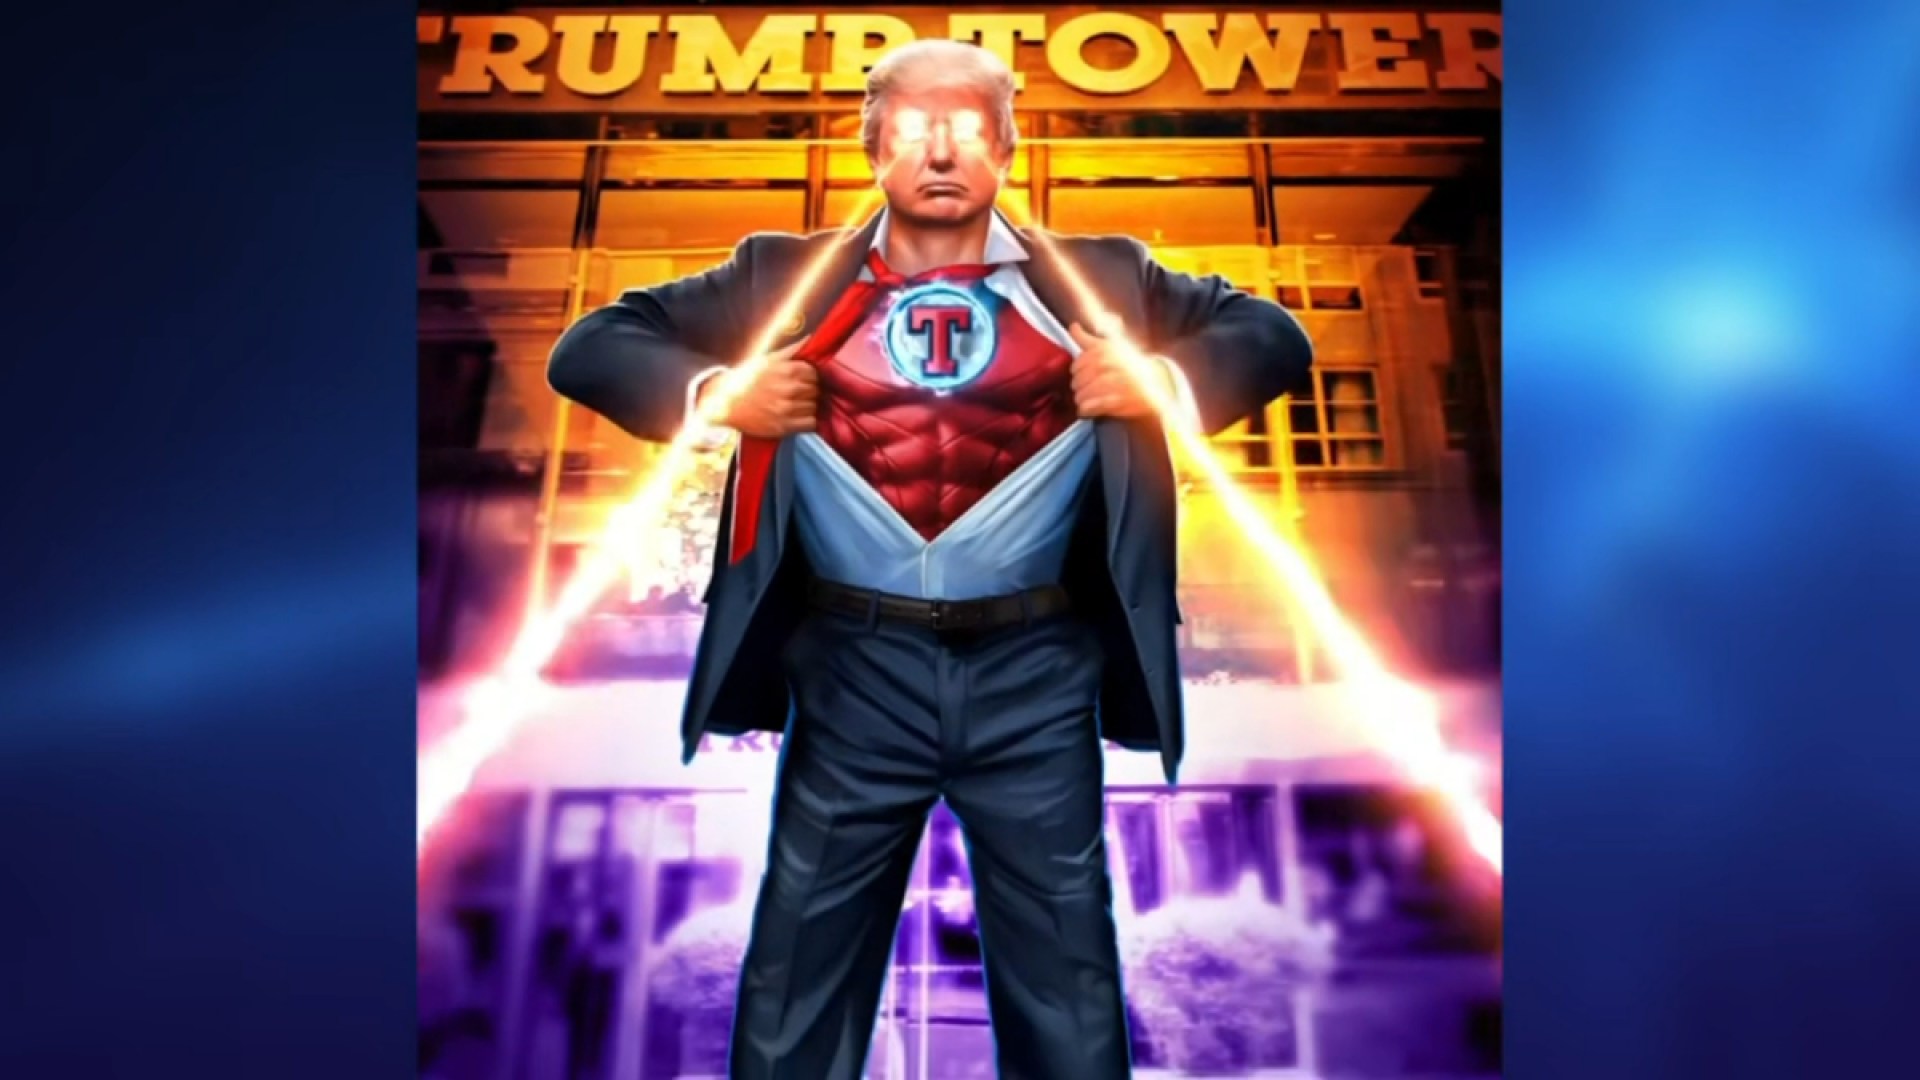 Donald Trump as a superhero. From the Trump Cards NFT collection.